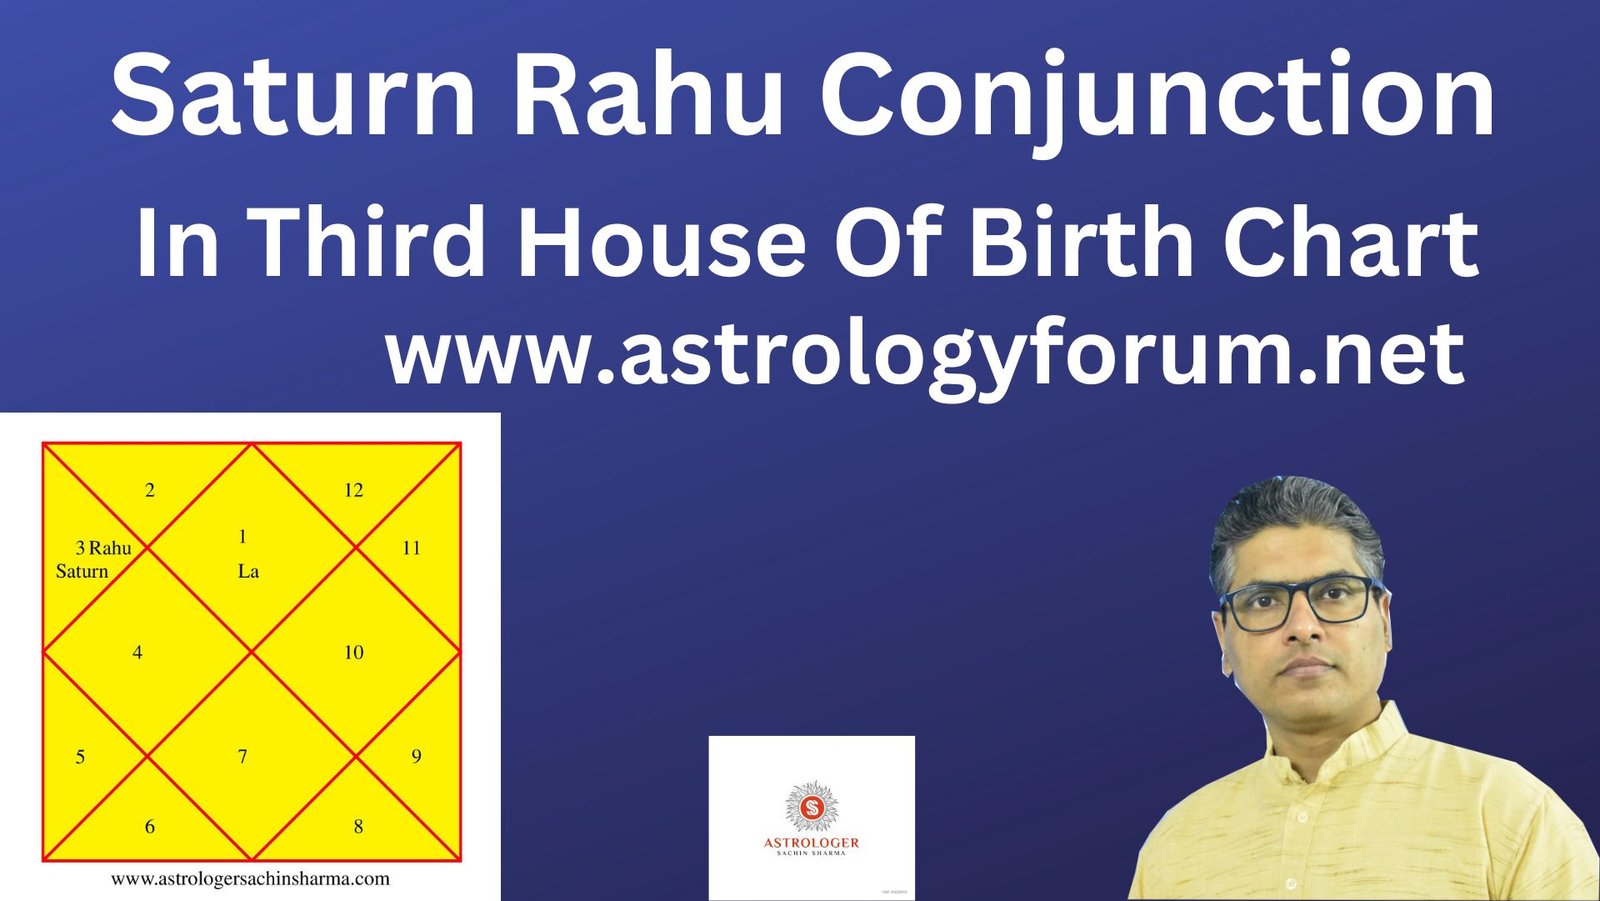 Rahu Saturn conjunction in the third house